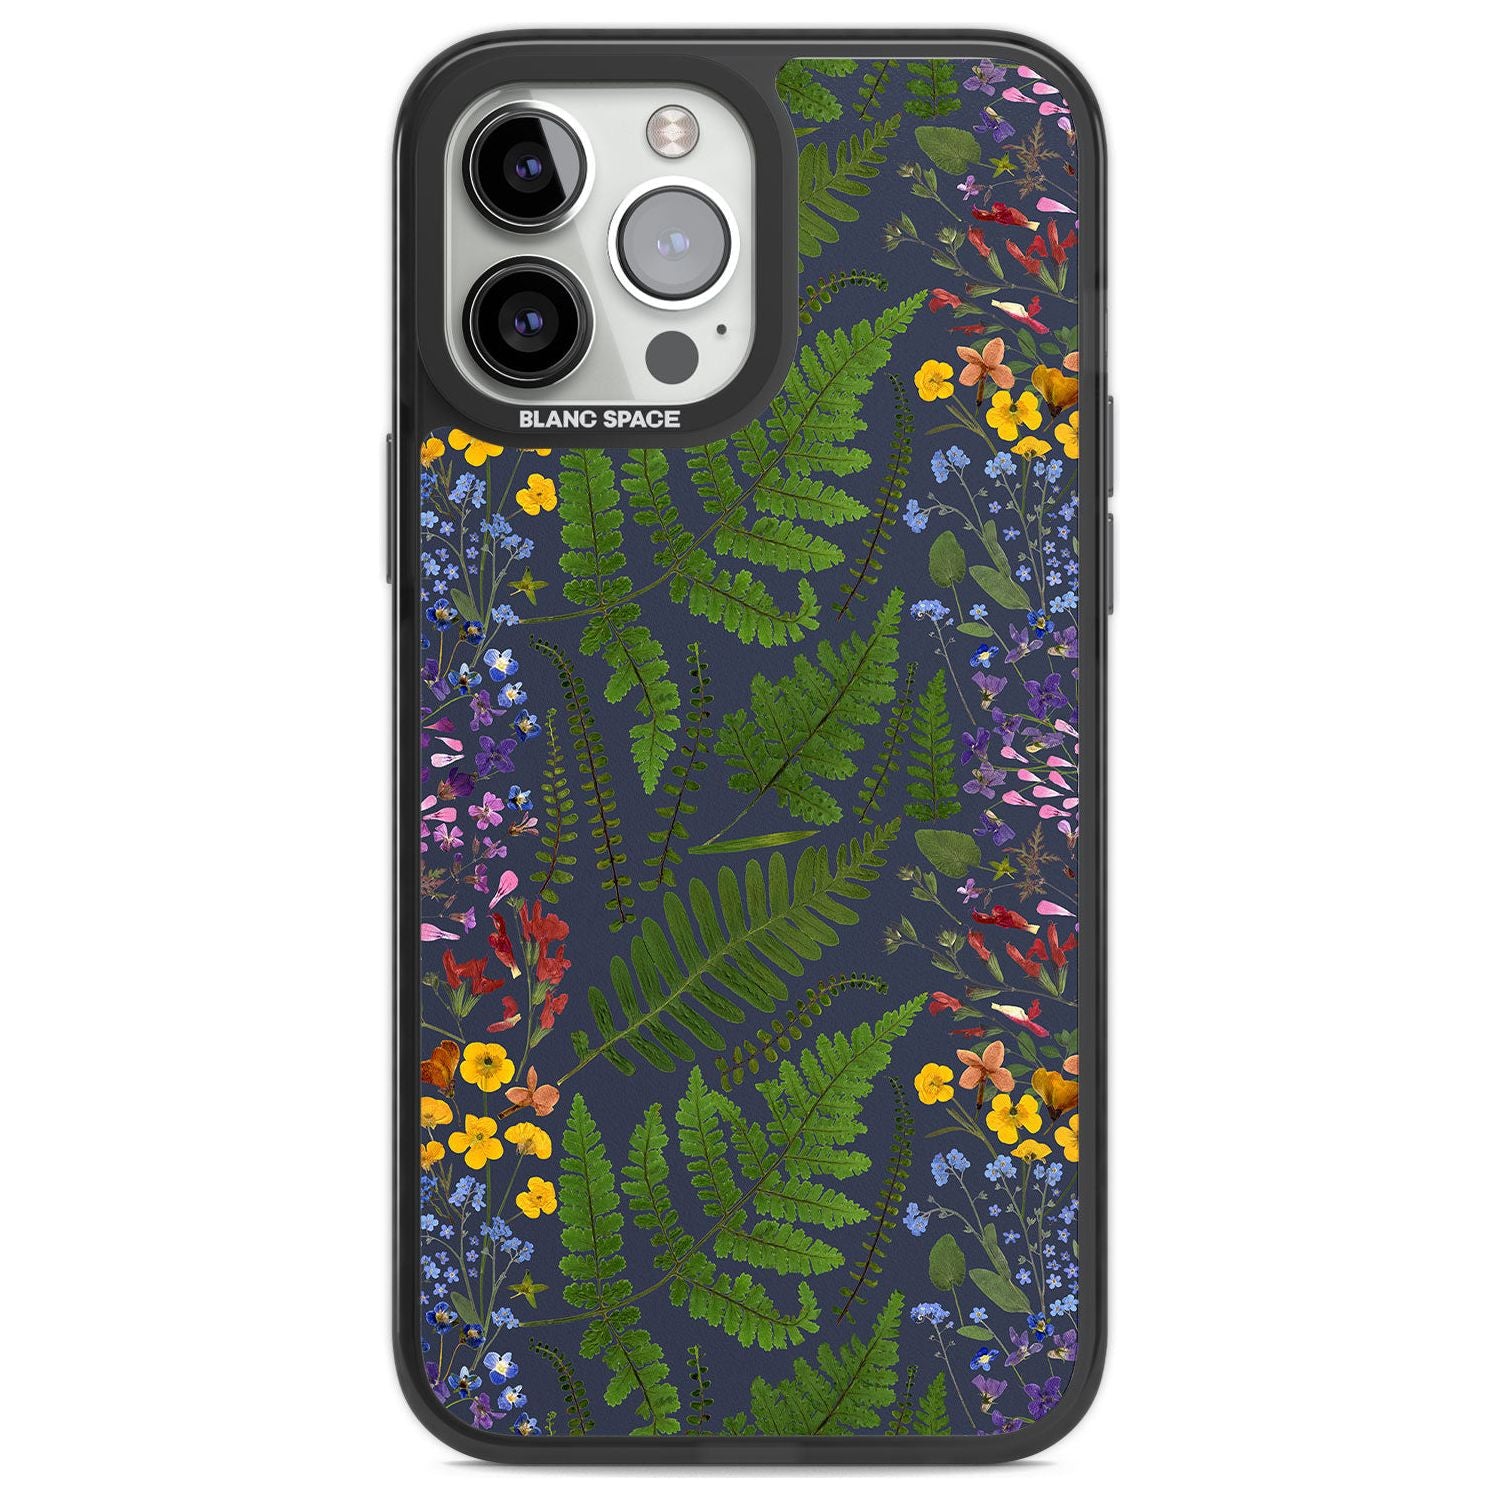 Busy Floral and Fern Design - Navy Phone Case iPhone 13 Pro Max / Black Impact Case,iPhone 14 Pro Max / Black Impact Case Blanc Space